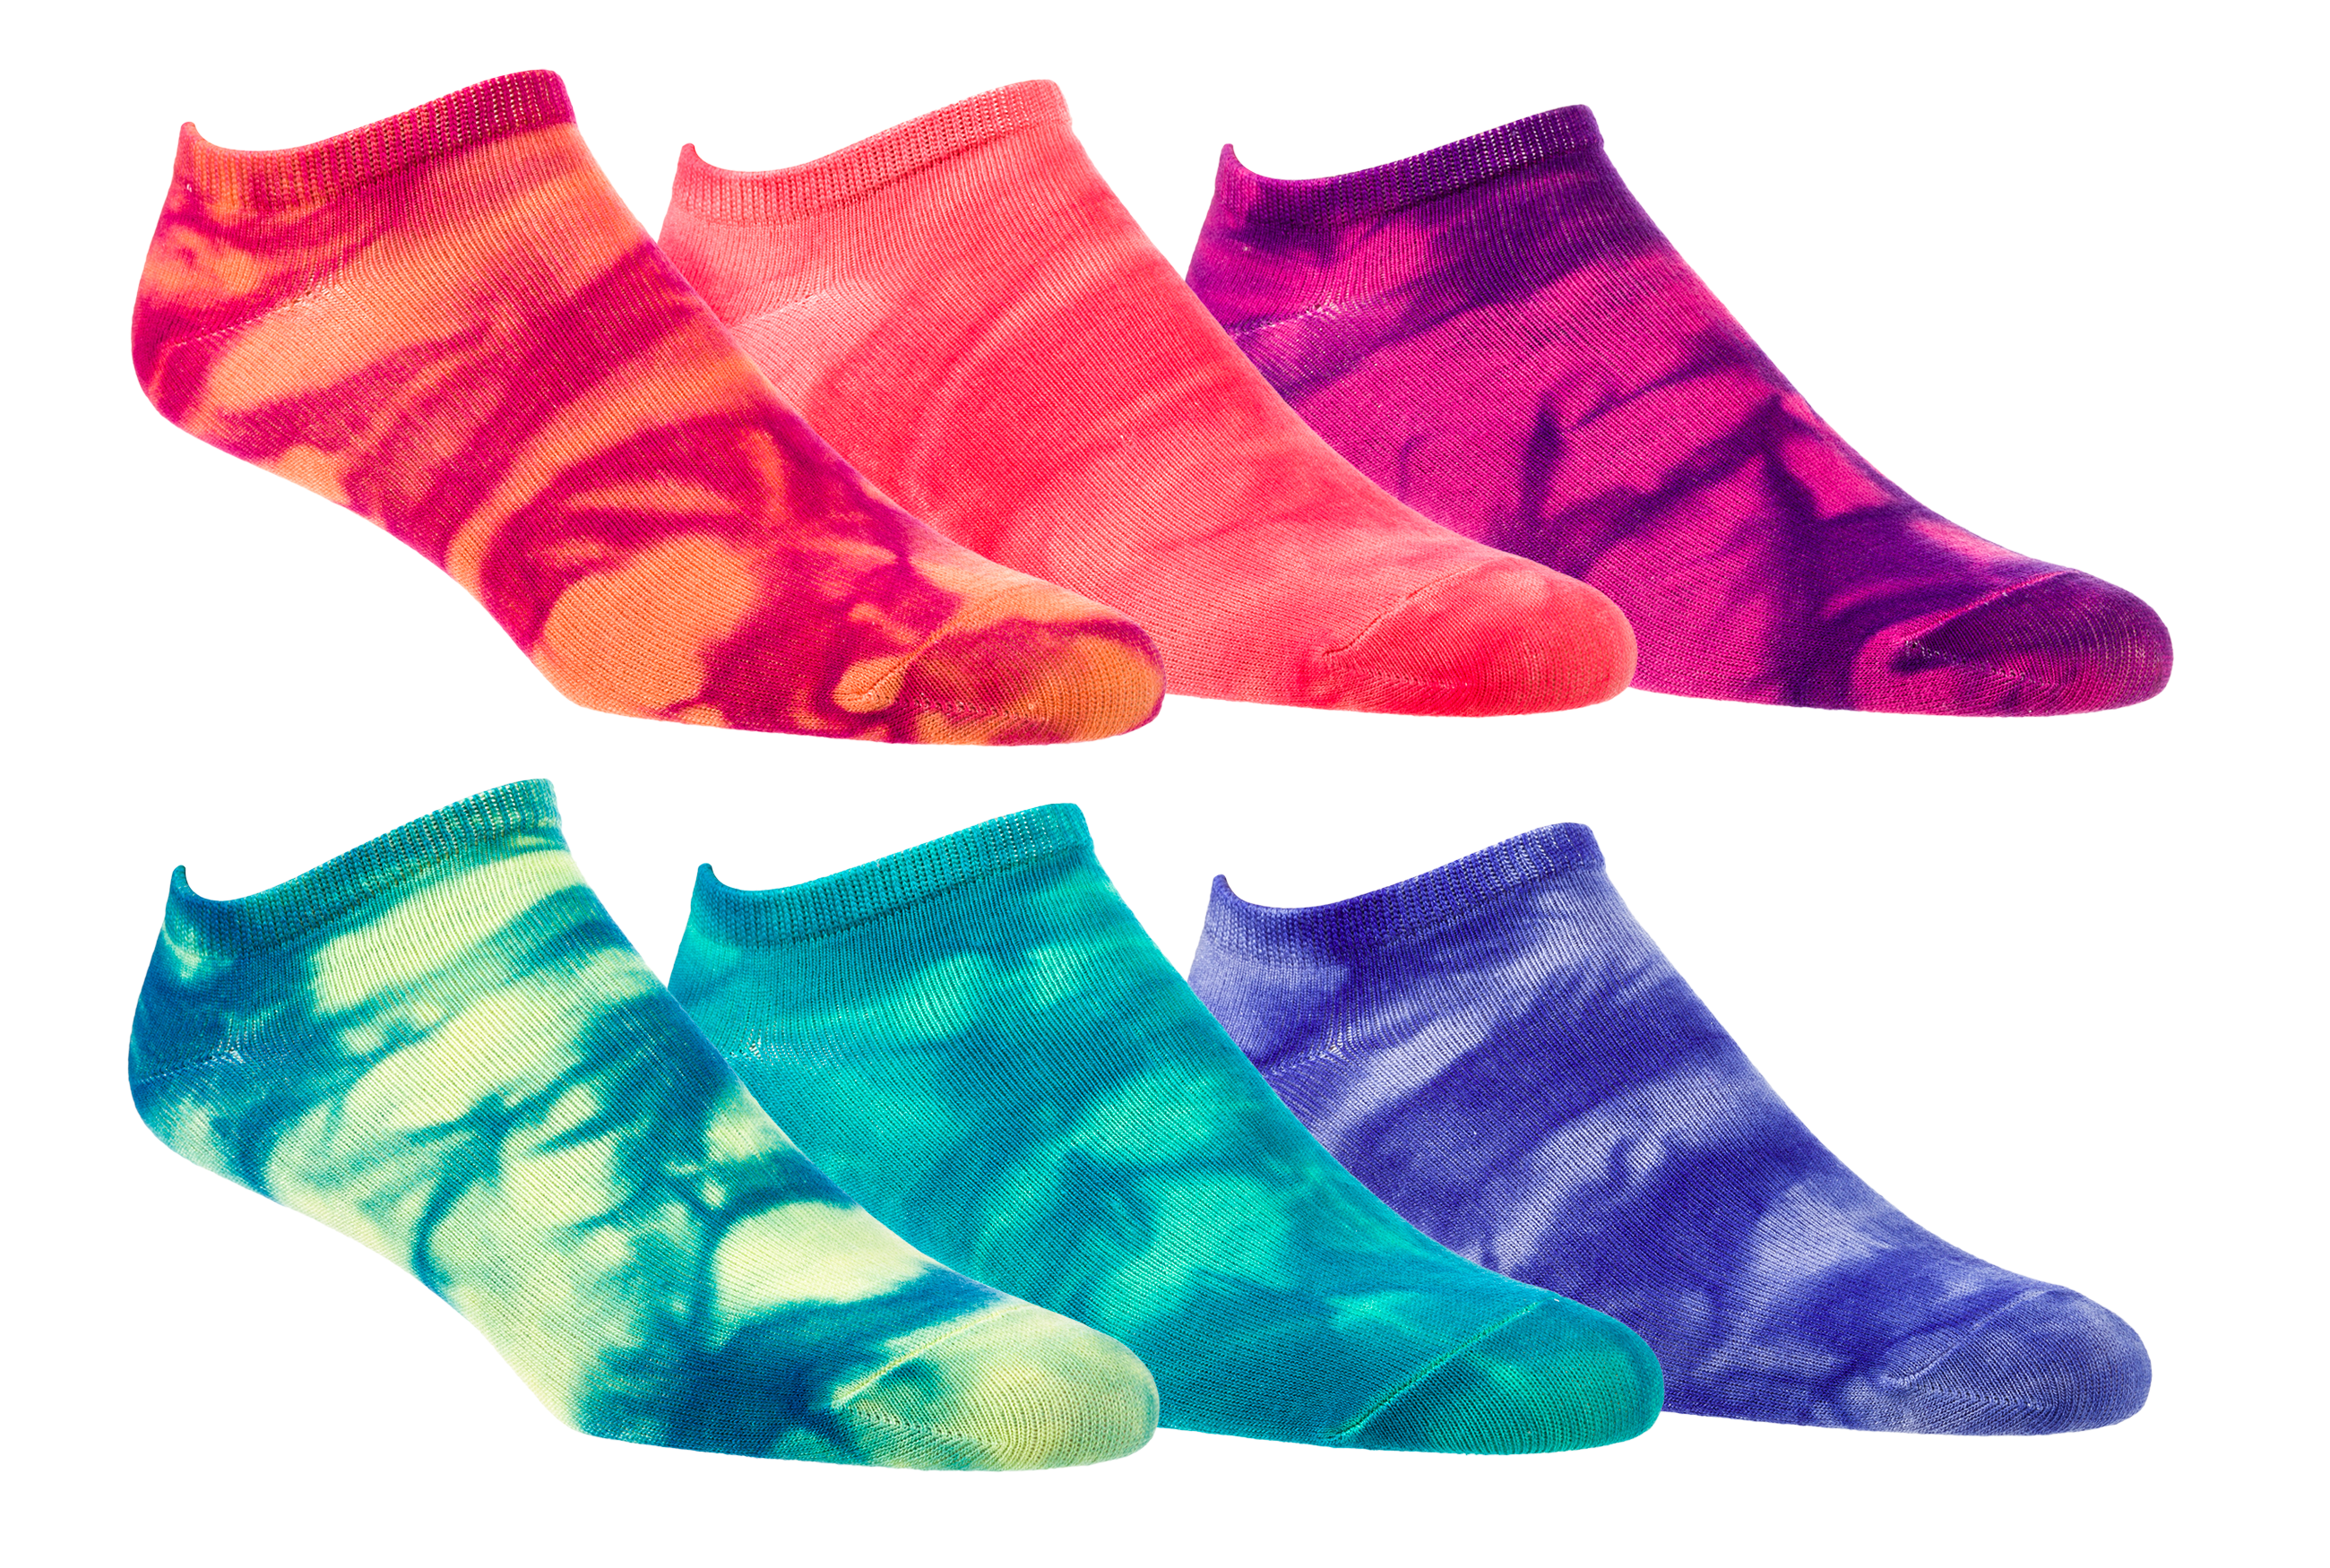 Natural Reflections No-Show Tie-Dye Socks for Ladies 6-Pair Pack